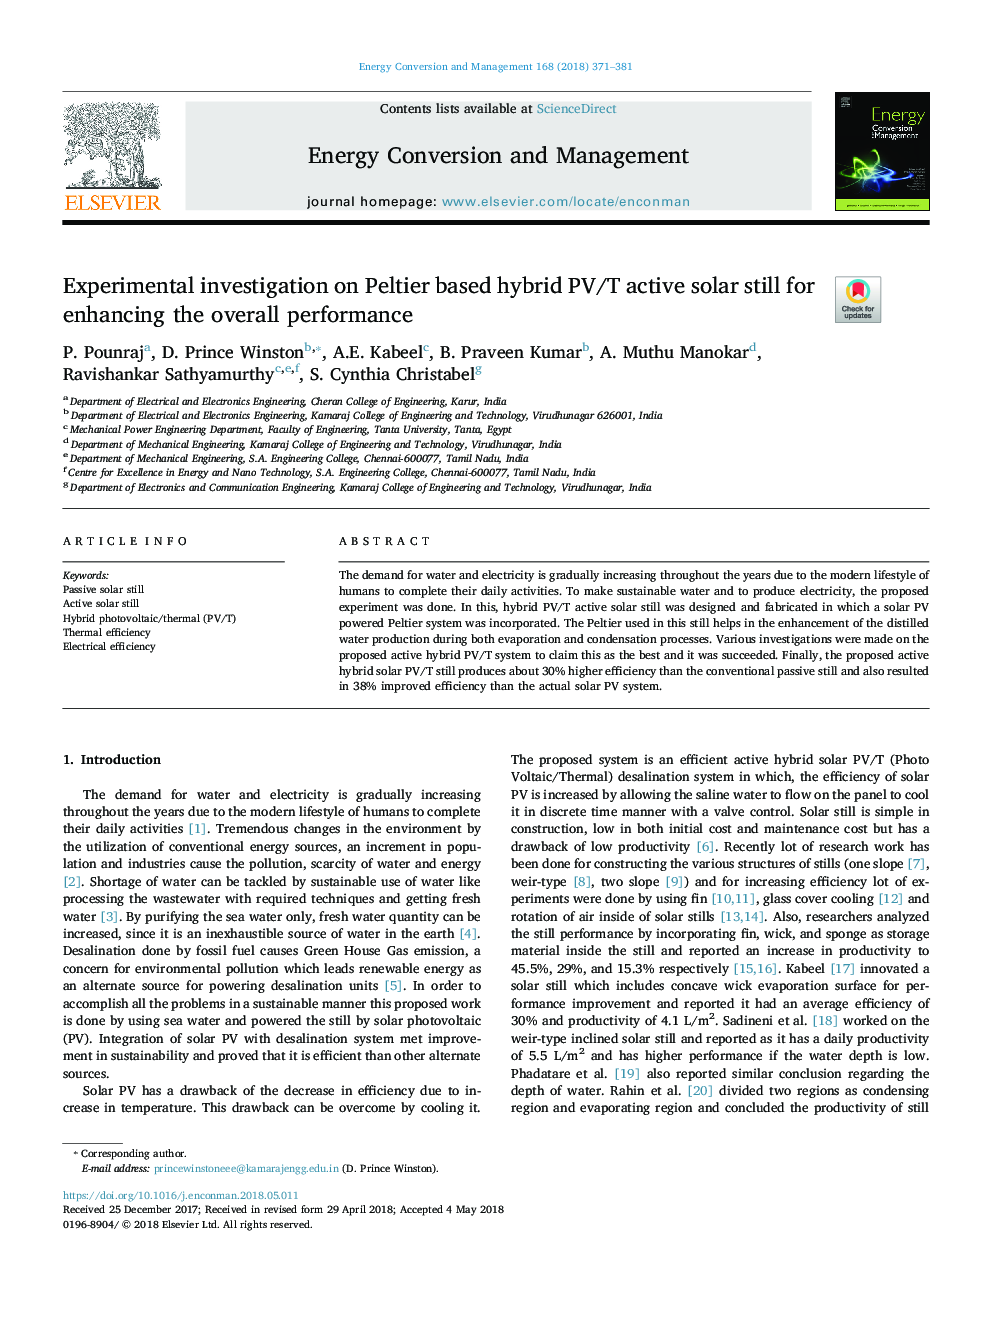 Experimental investigation on Peltier based hybrid PV/T active solar still for enhancing the overall performance